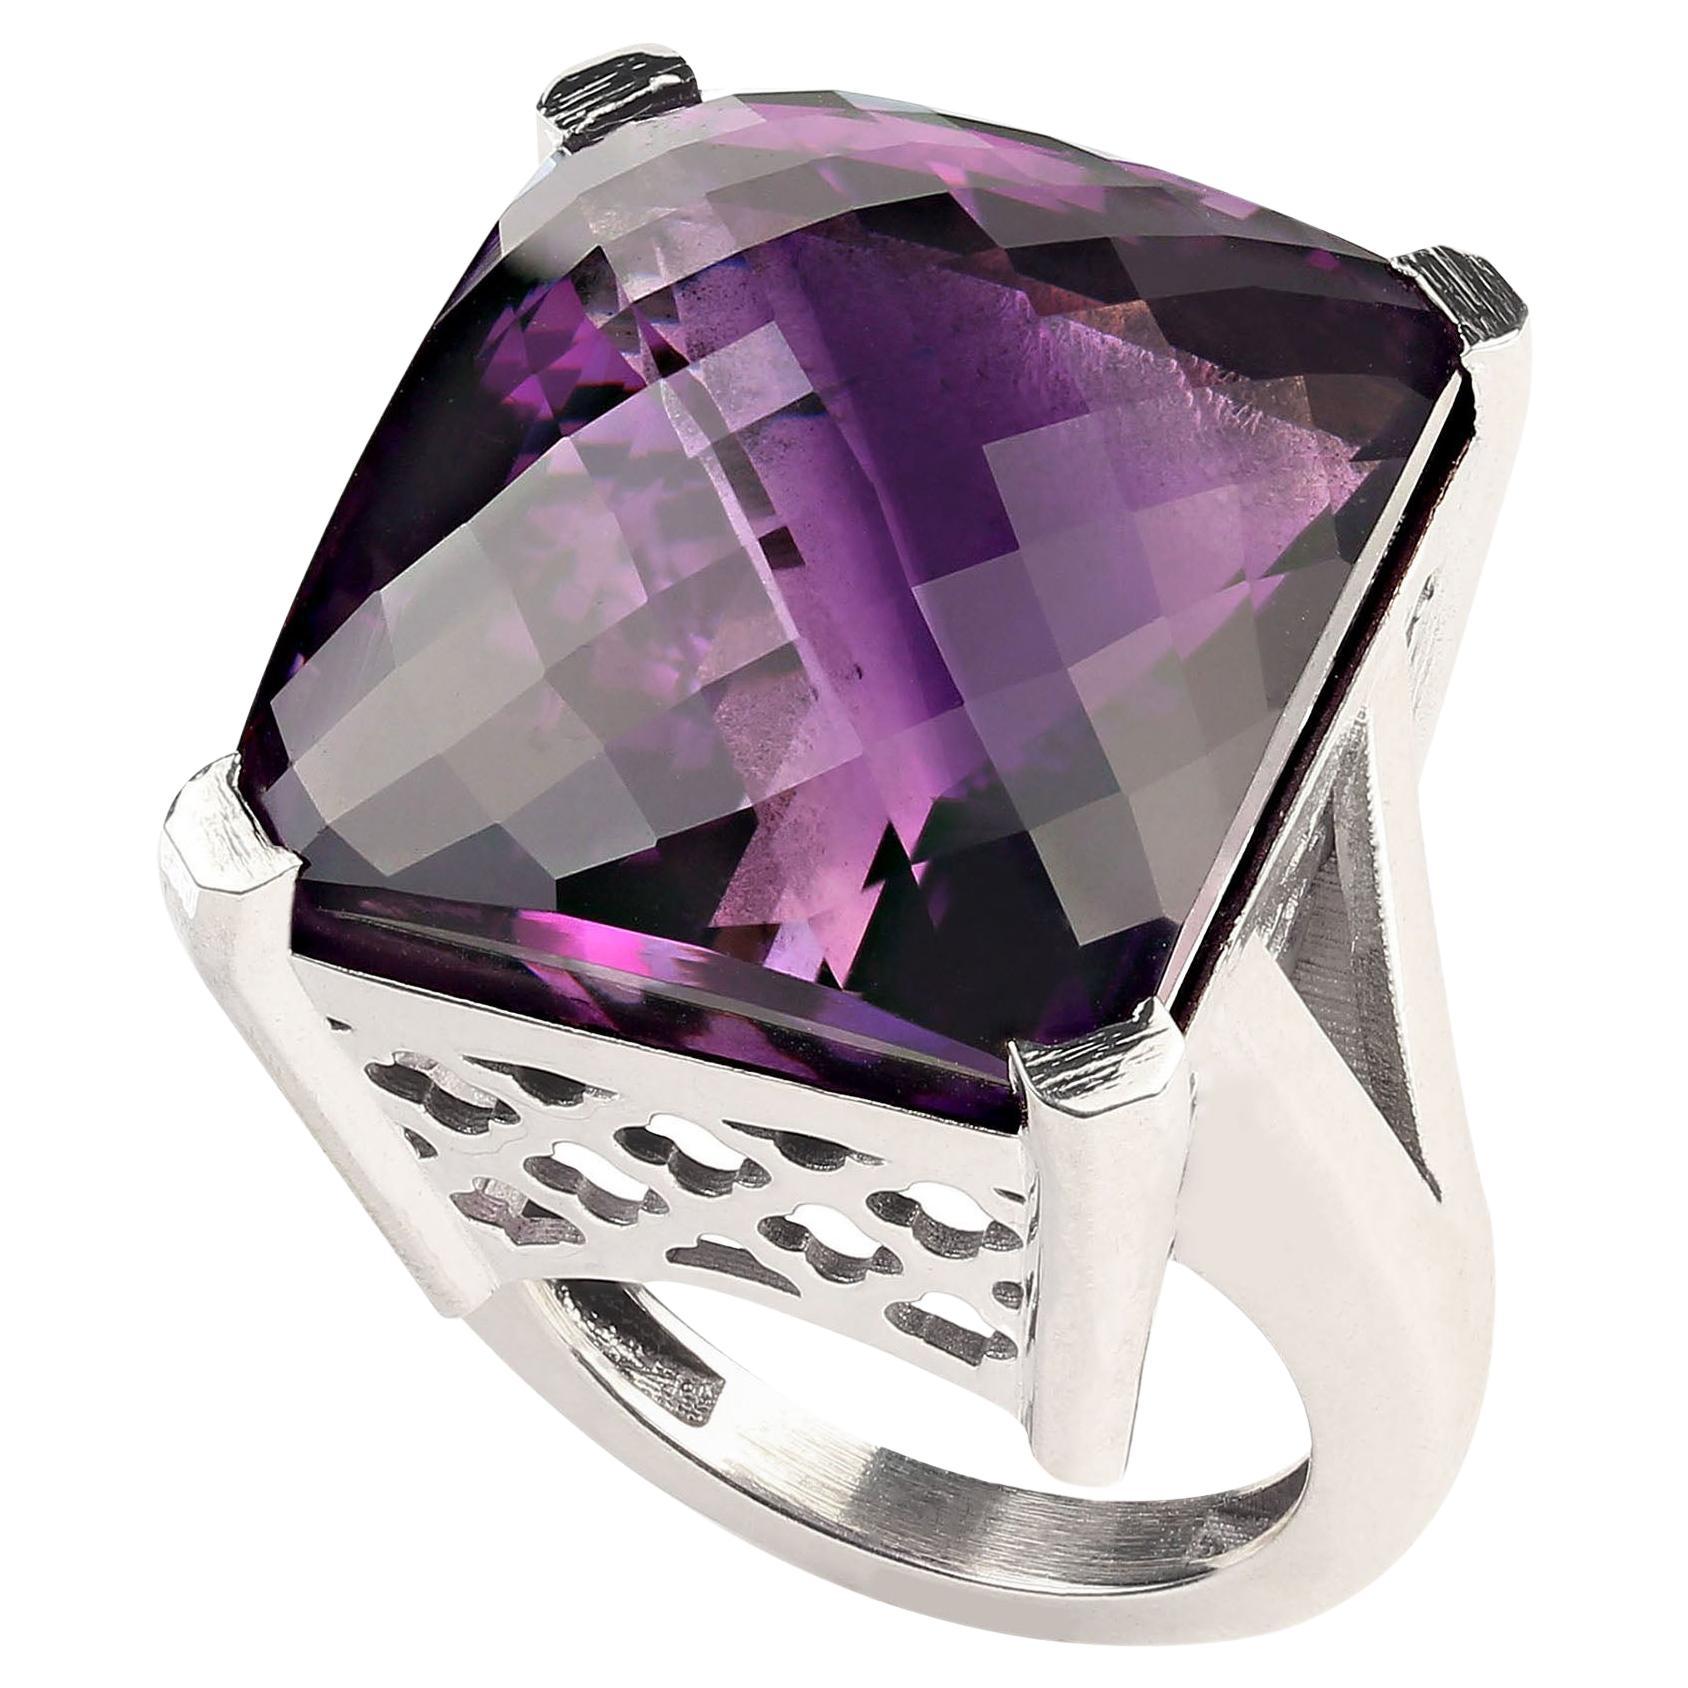 56Ct Square Awe-Inspiring Amethyst with a checkerboard table in custom made Sterling Silver setting.  This one of a kind ring is stunning, the 23x21MM Amethyst is almost knuckle to knuckle.  Amethyst is the February birthstone and is said to protect